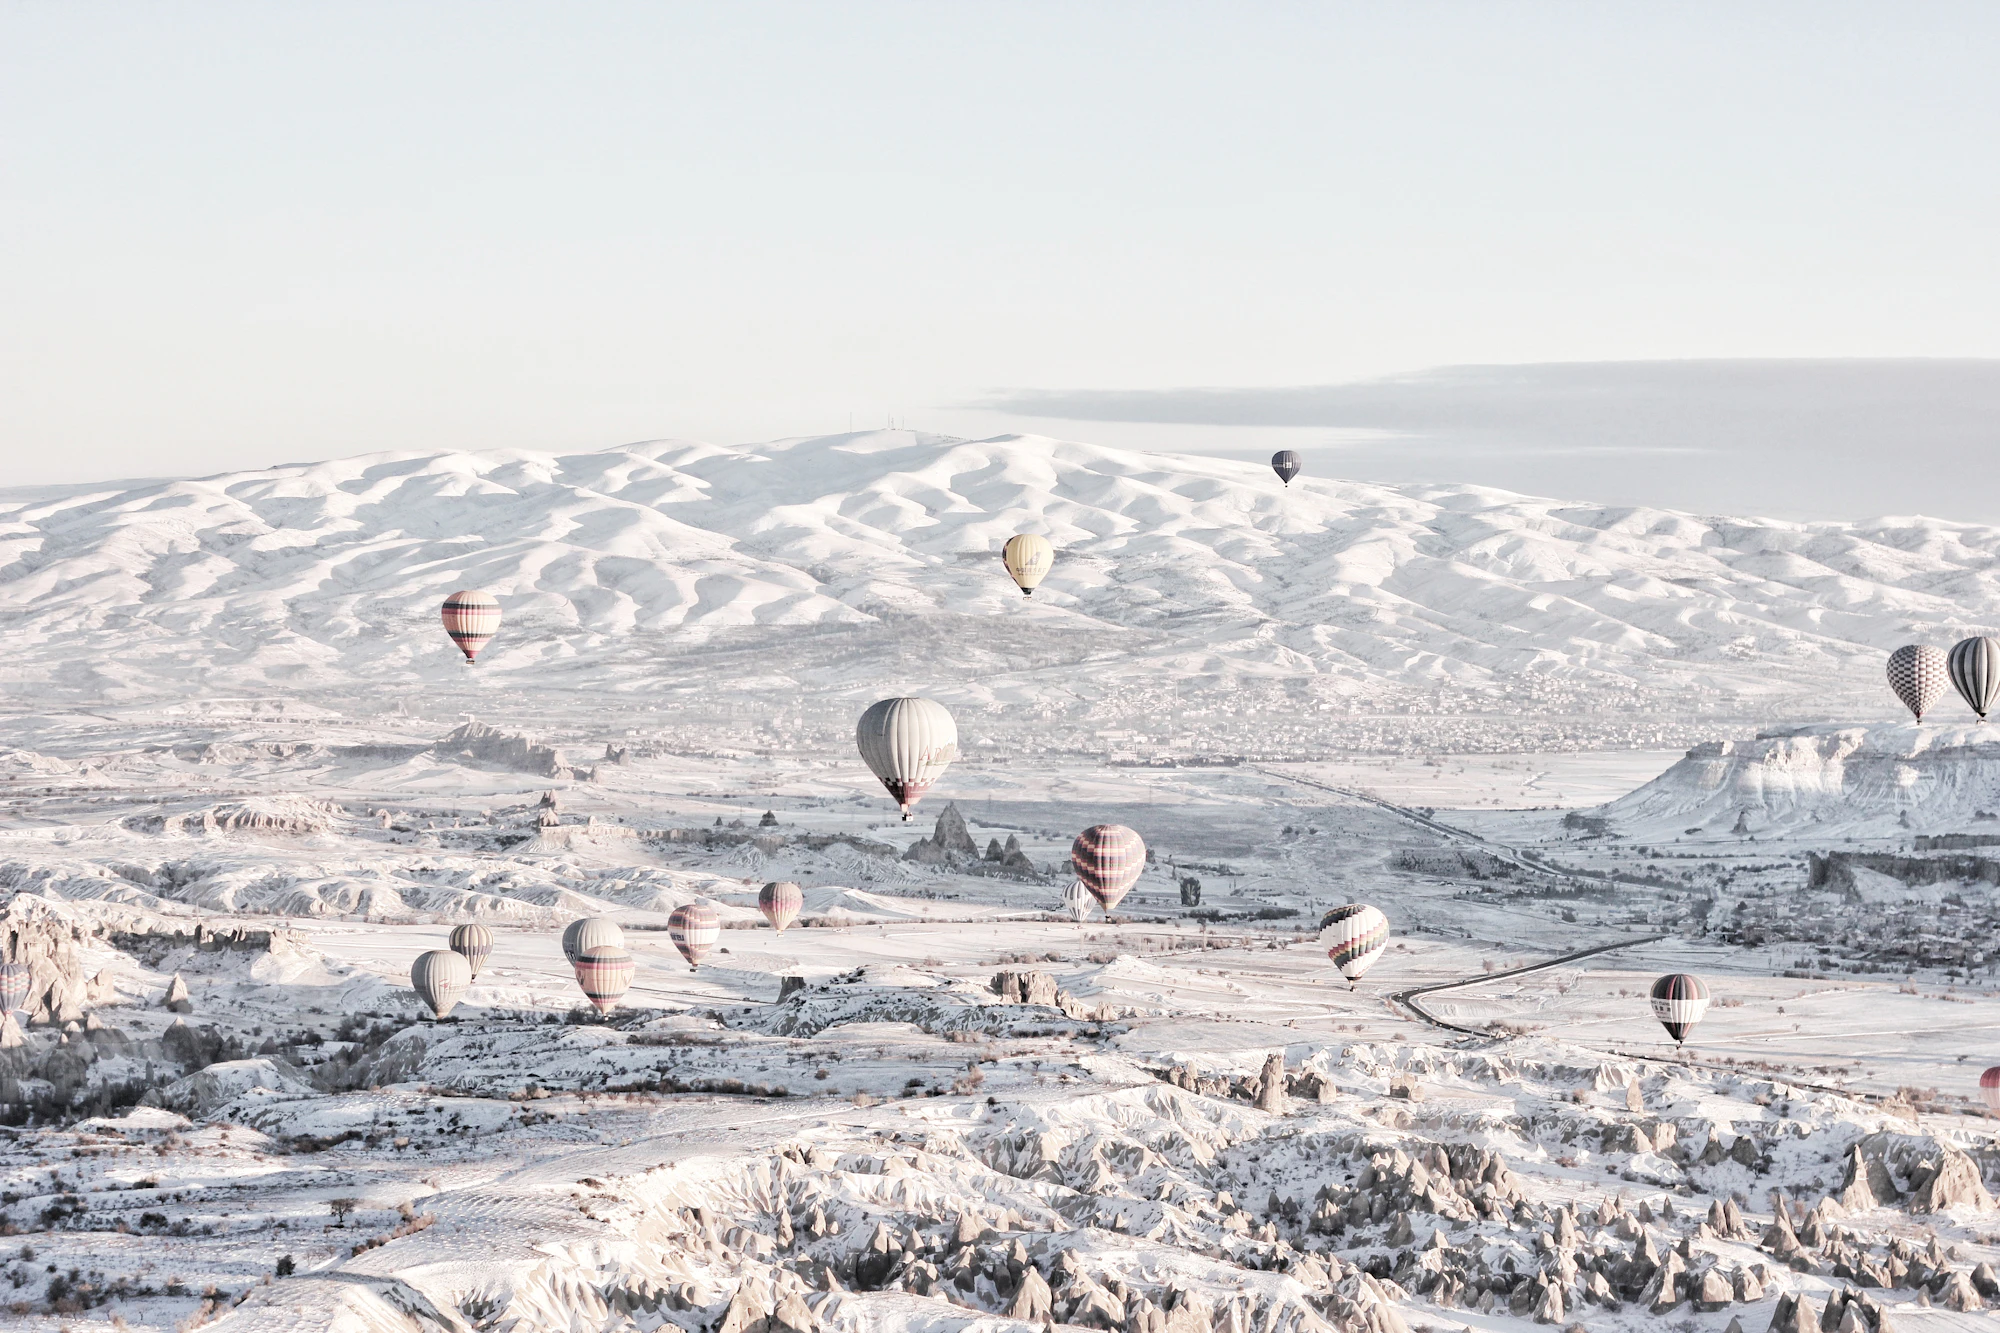 Hot Air Balloons with winter settings